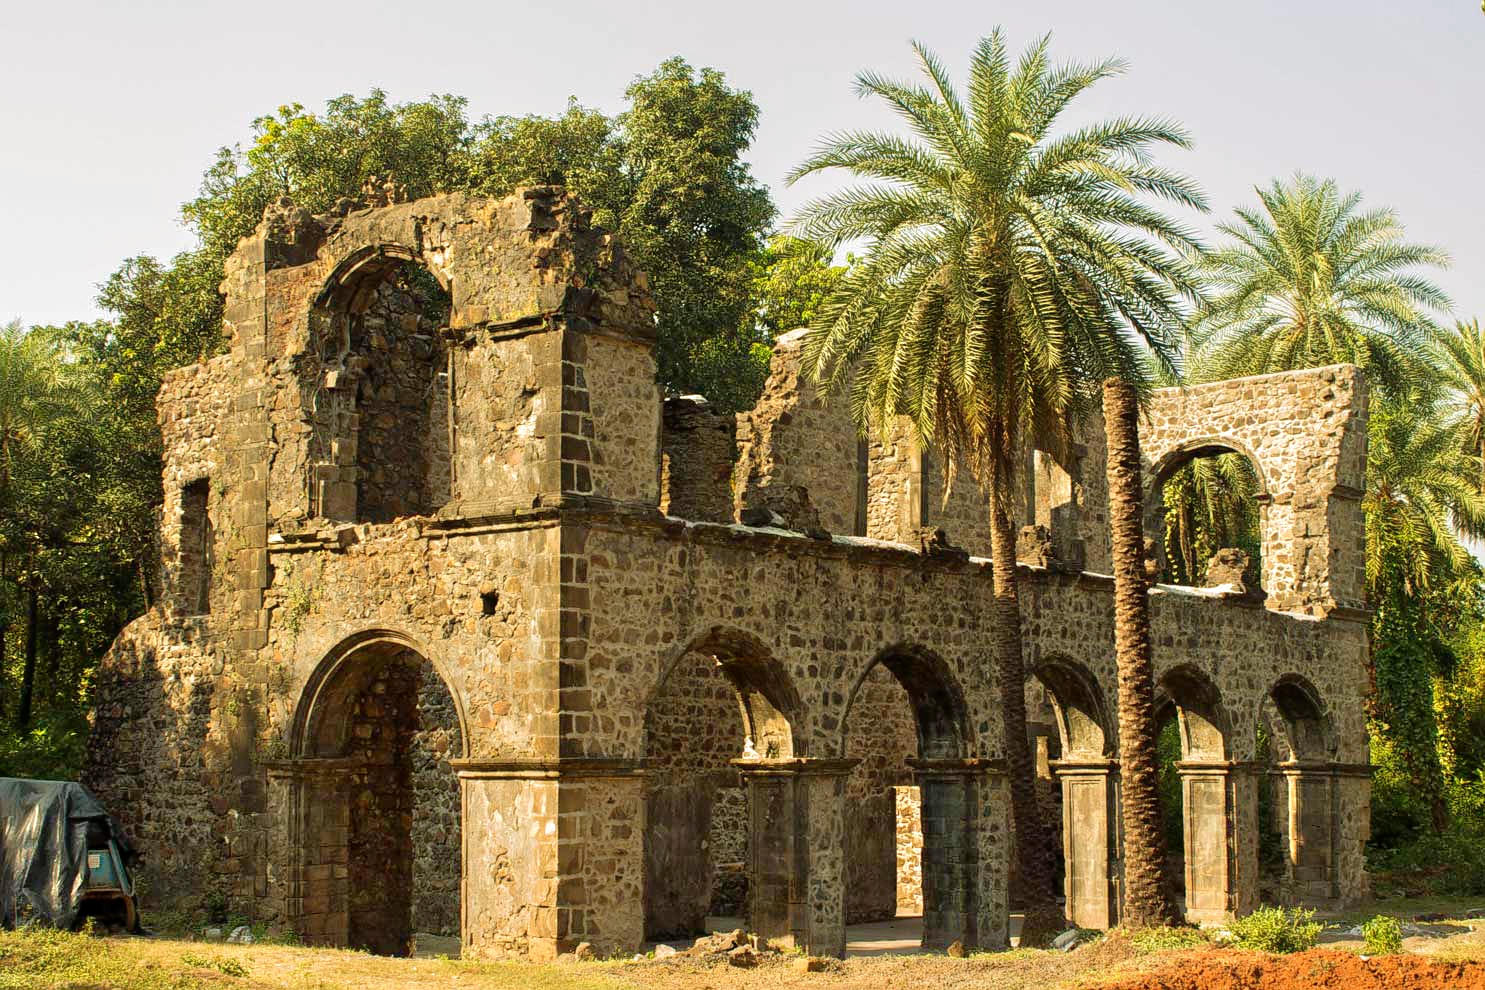 Bassein Fort Overview